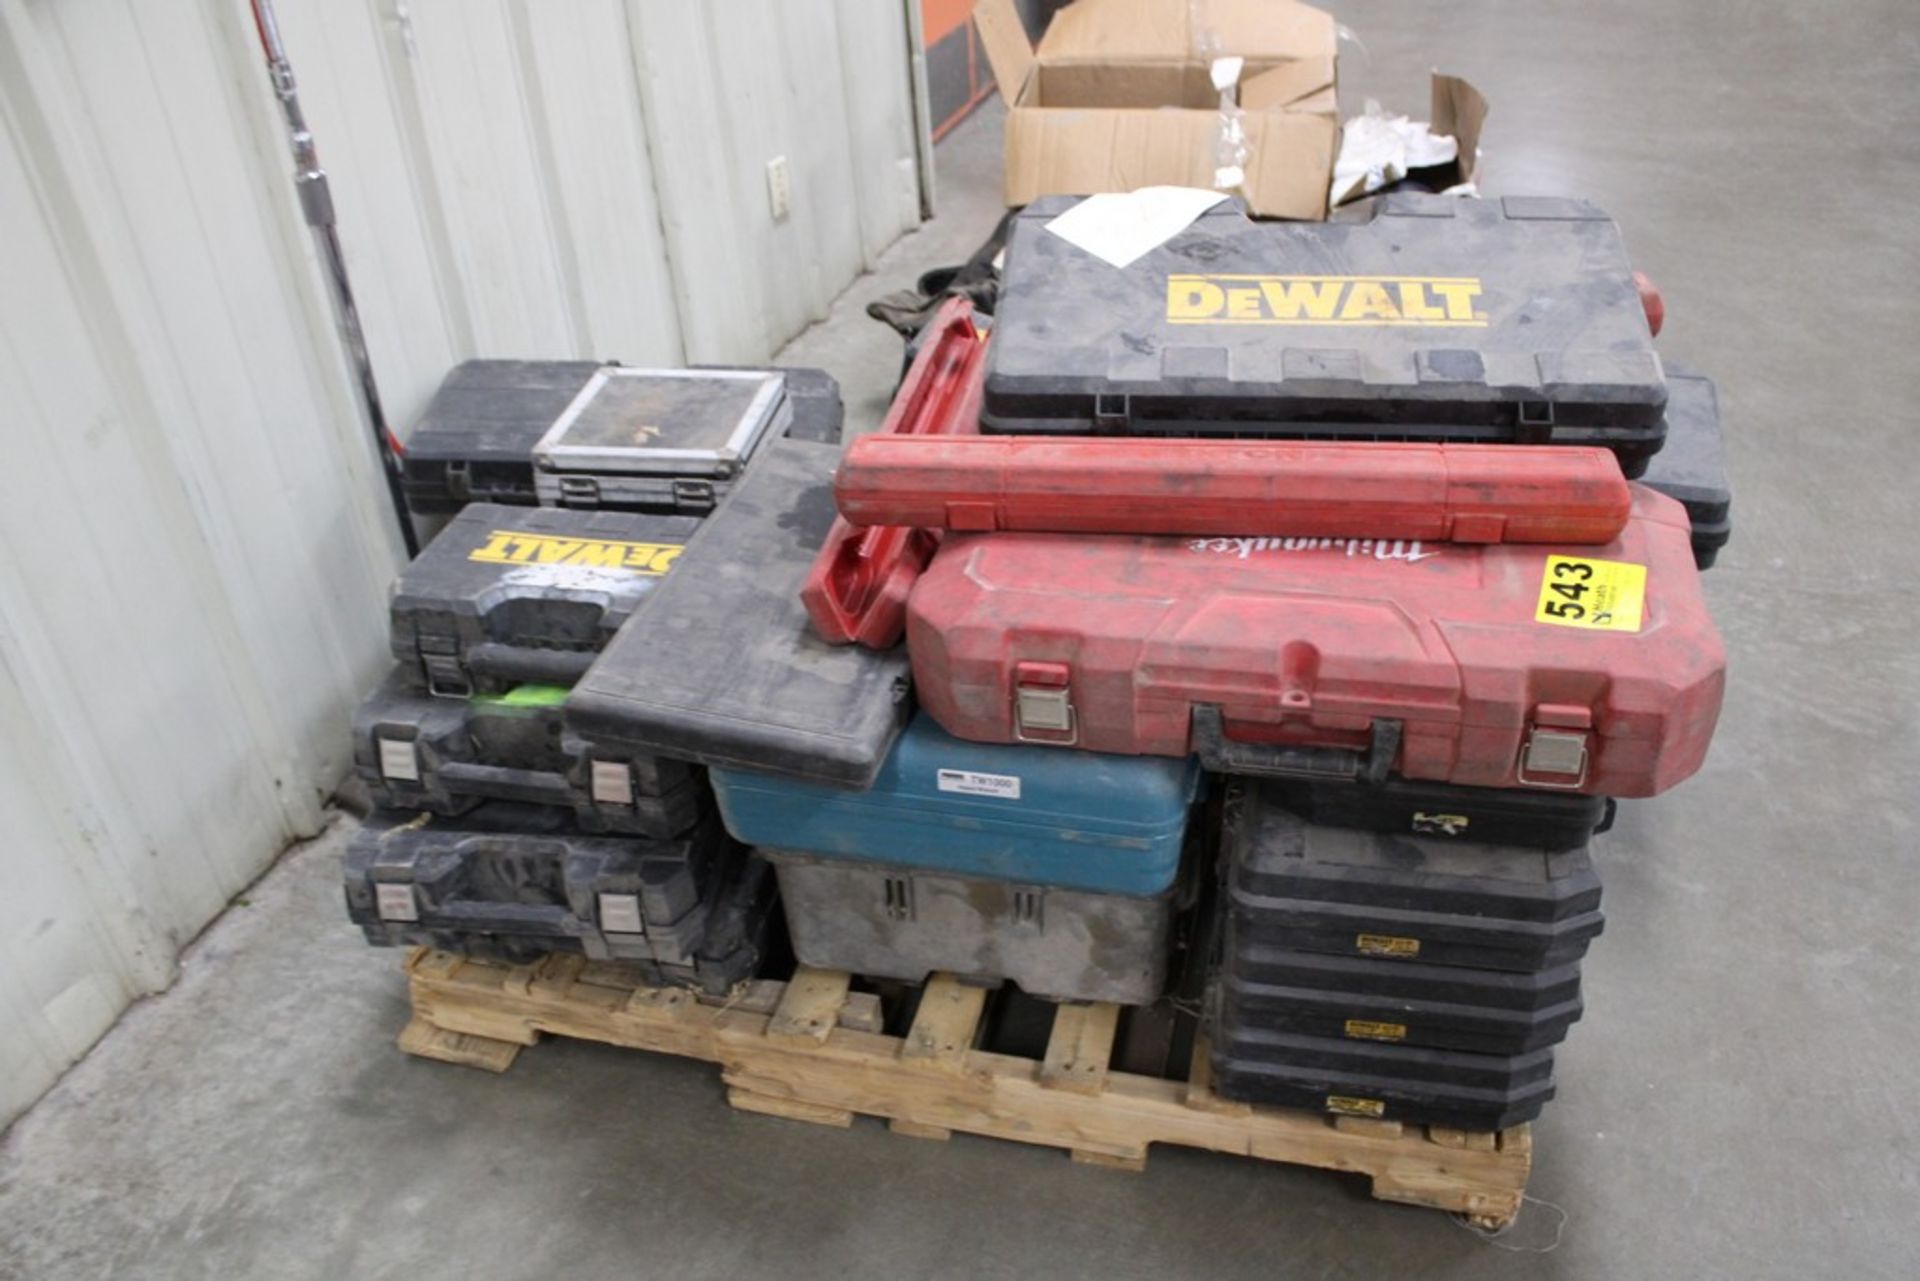 LARGE ASSORTEMENT OF PLASTIC TOOL BOXES, ALL EMPTY